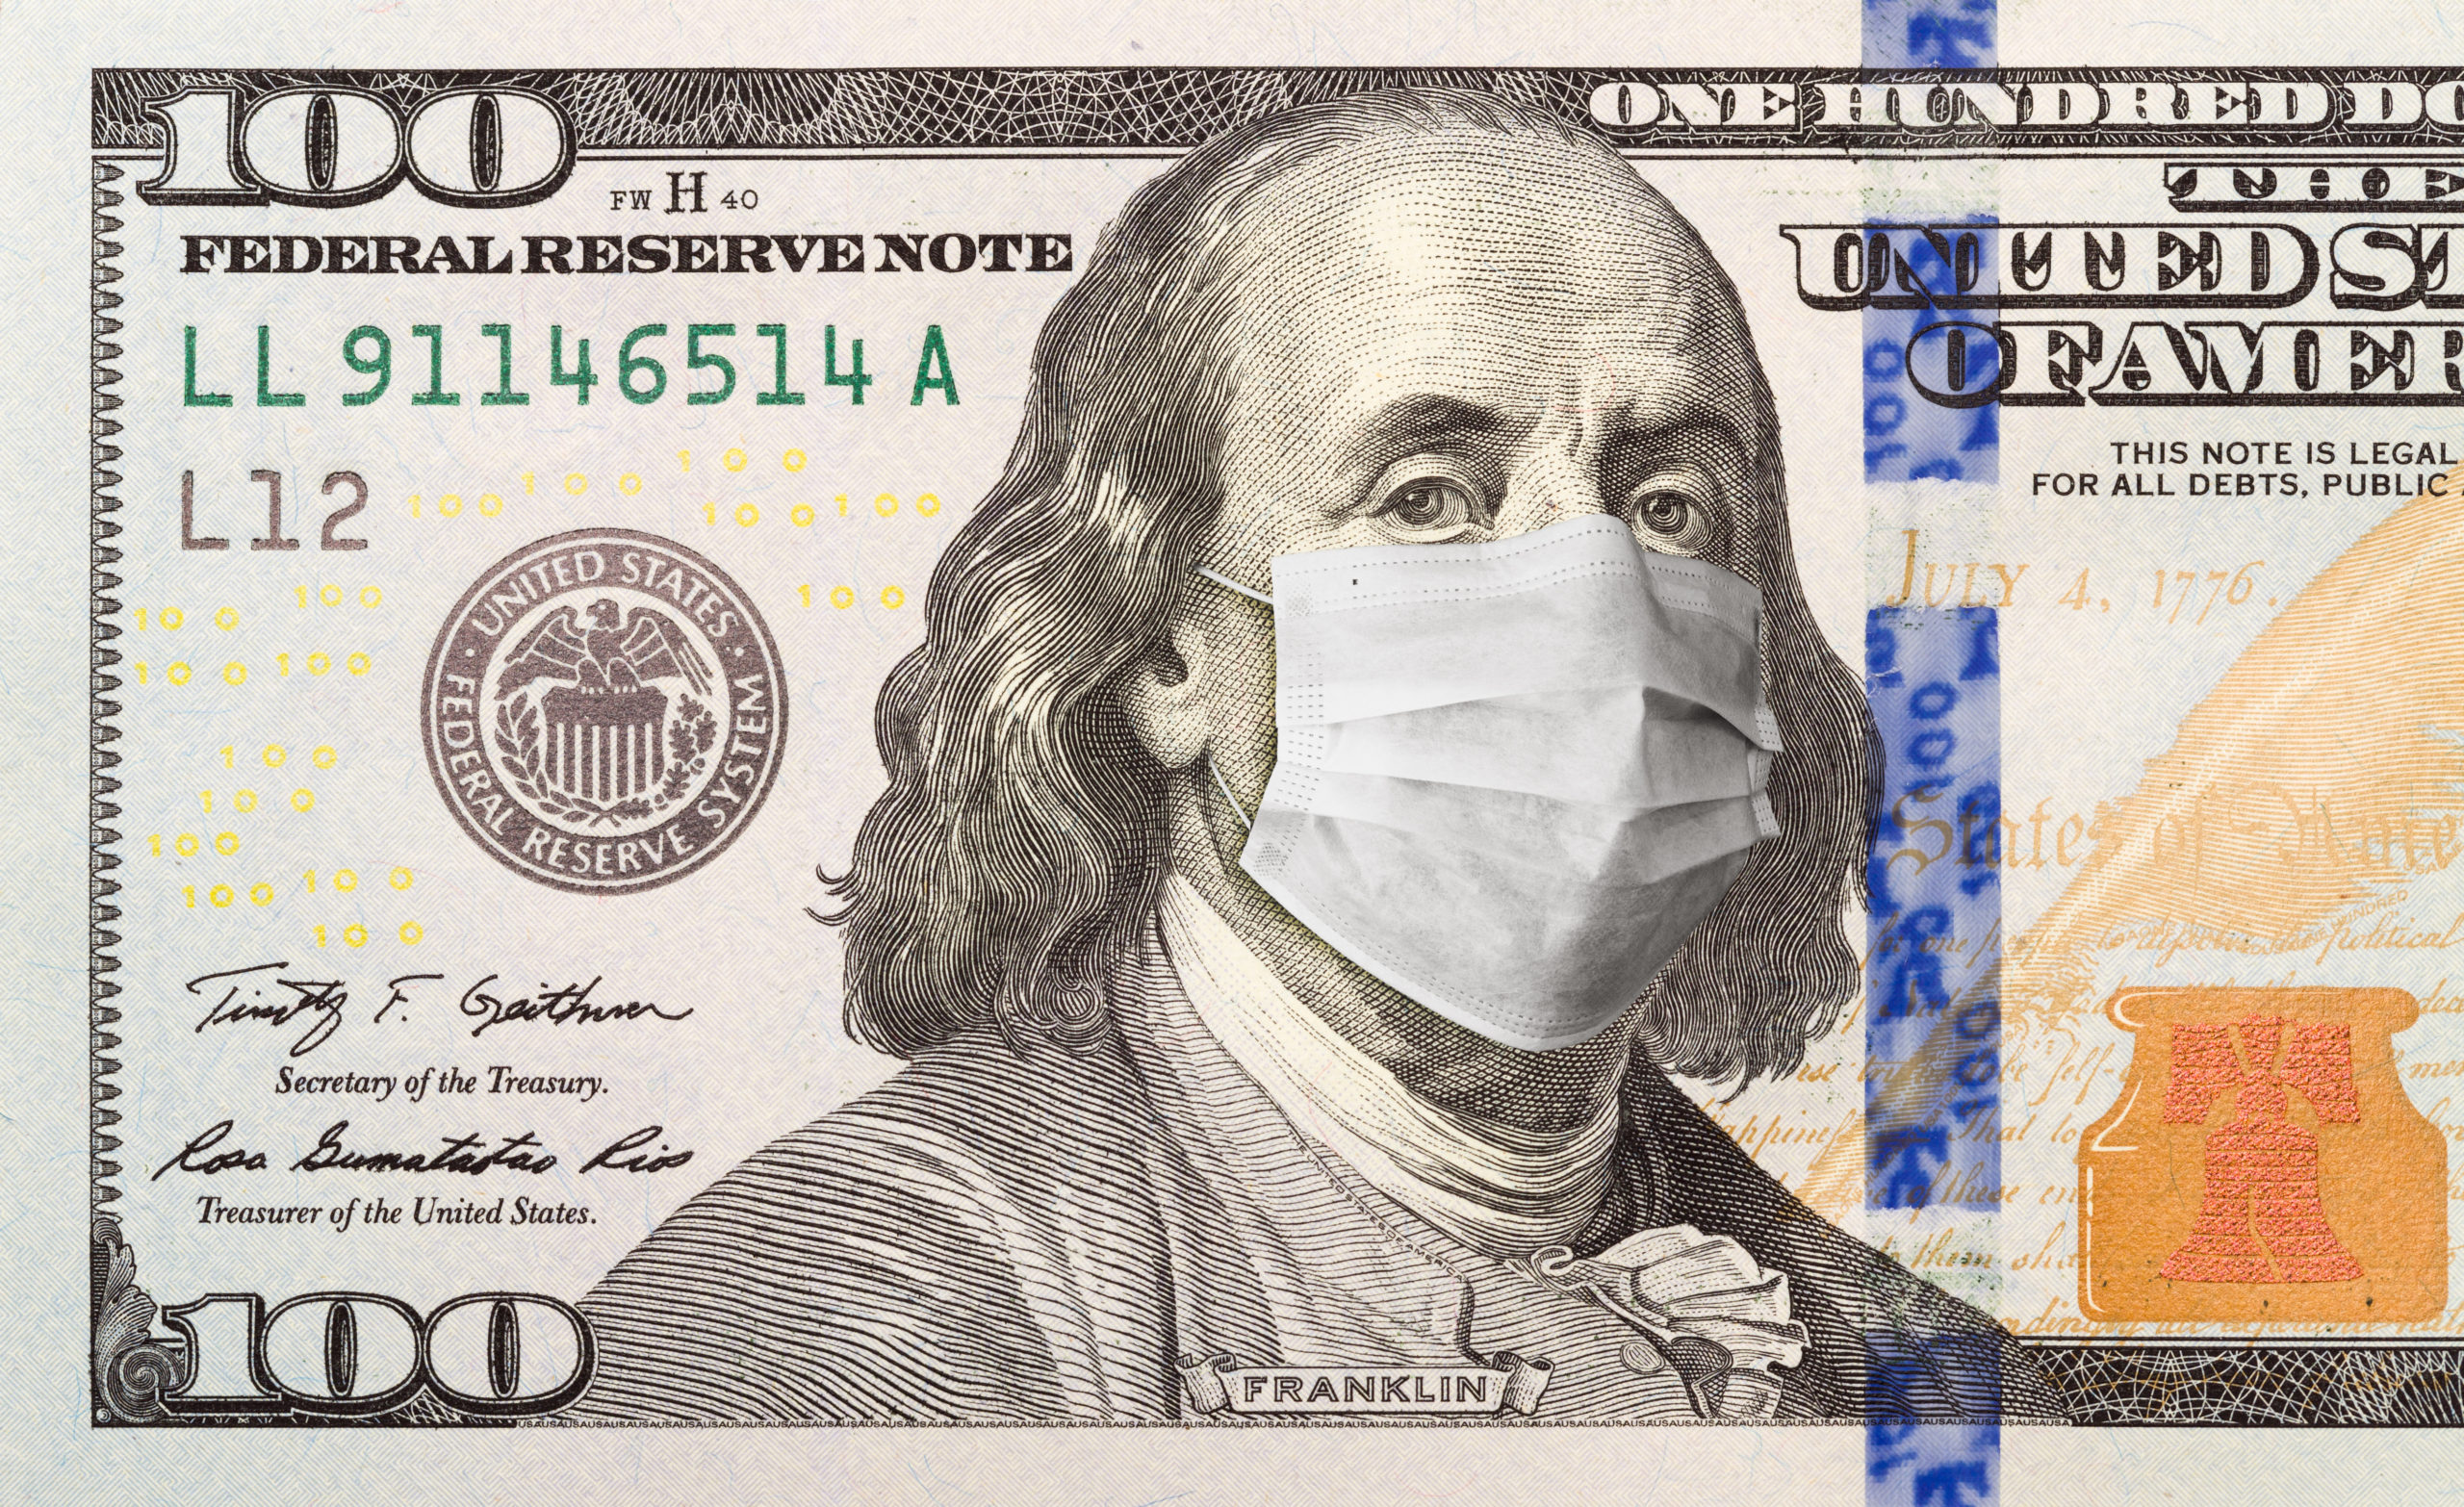 Hundred Dollar Bill With a facemask